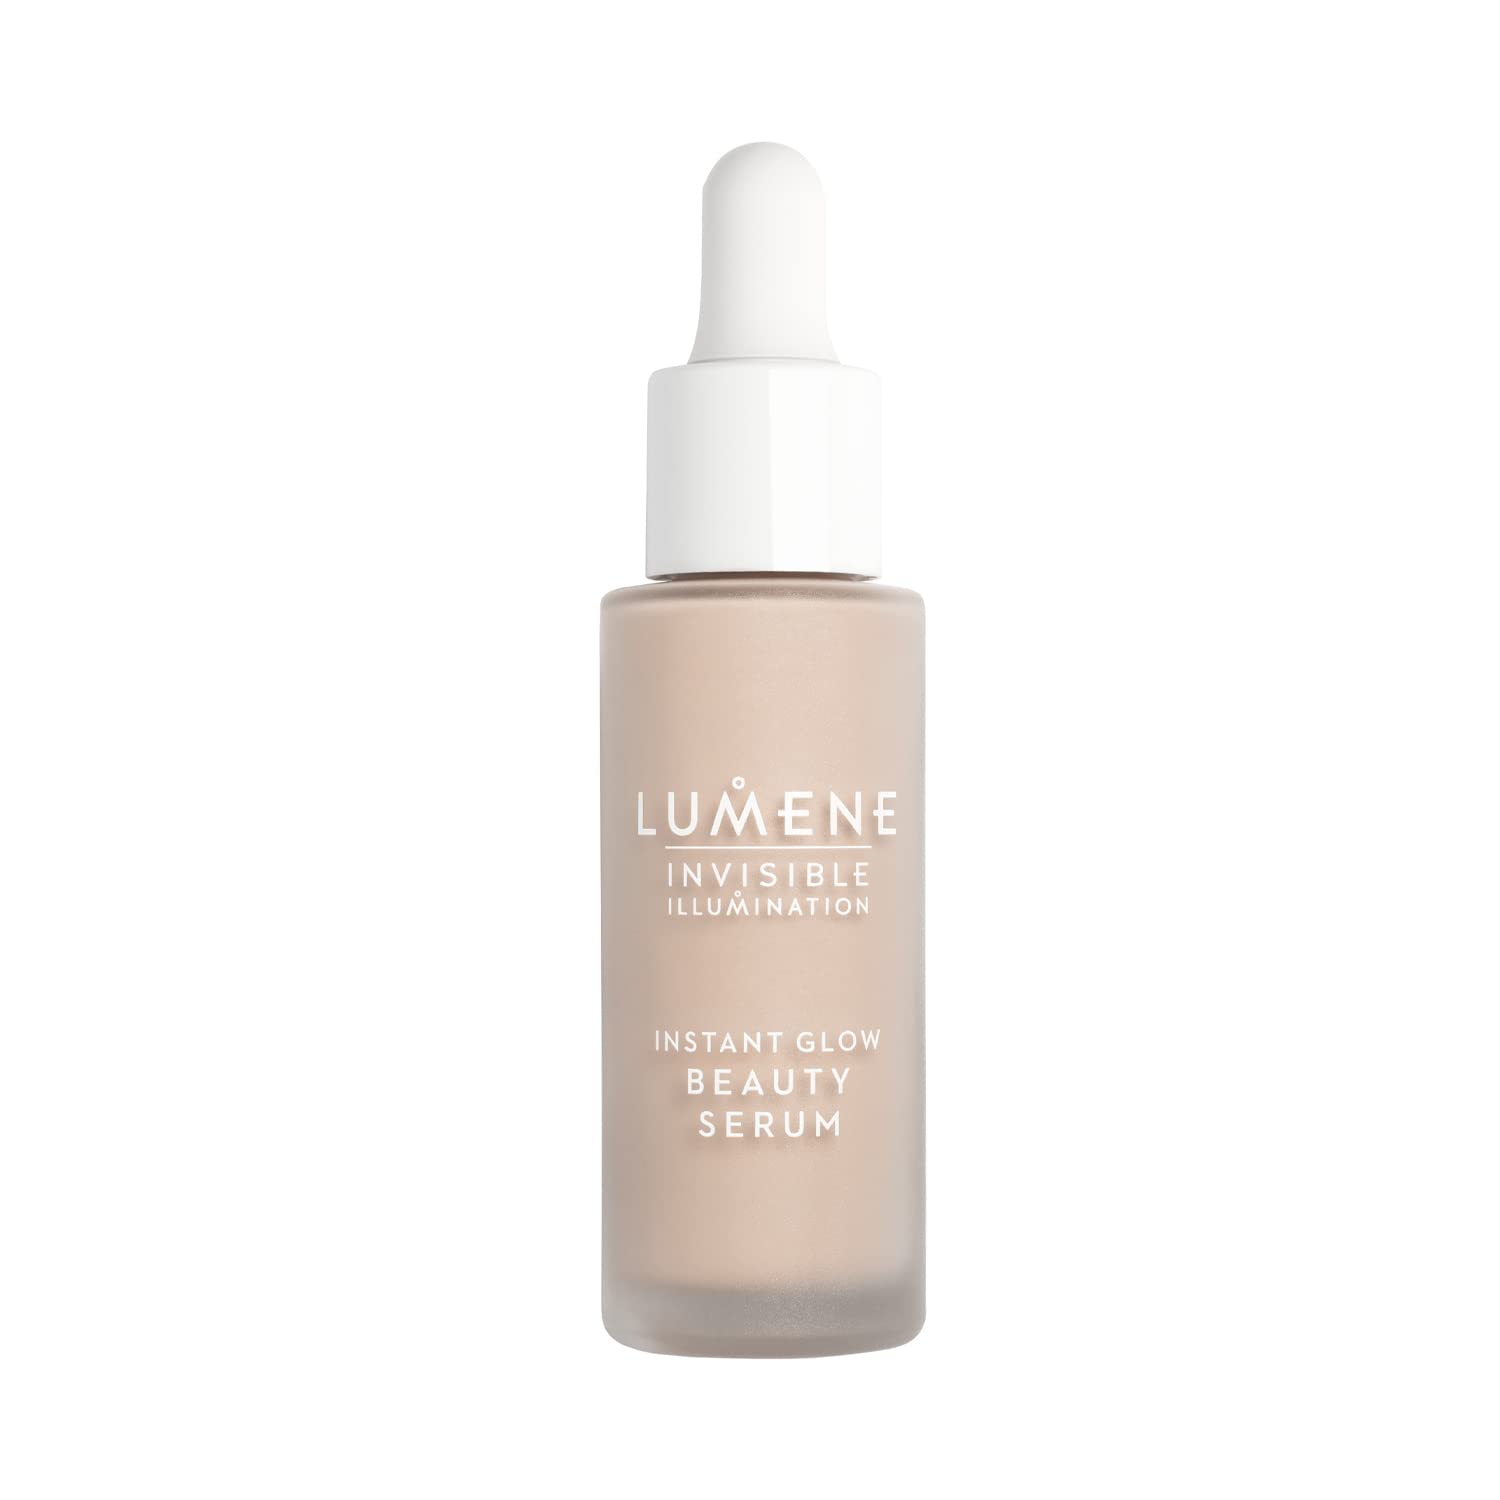 Lumene Invisible Illumination Instant Glow Beauty Serum - Natural Finish Skin Brightening Face Serum - Hydrating Foundation Tinted Serum with Pearlescent Pigments for Glowing Skin - Light (30ml)